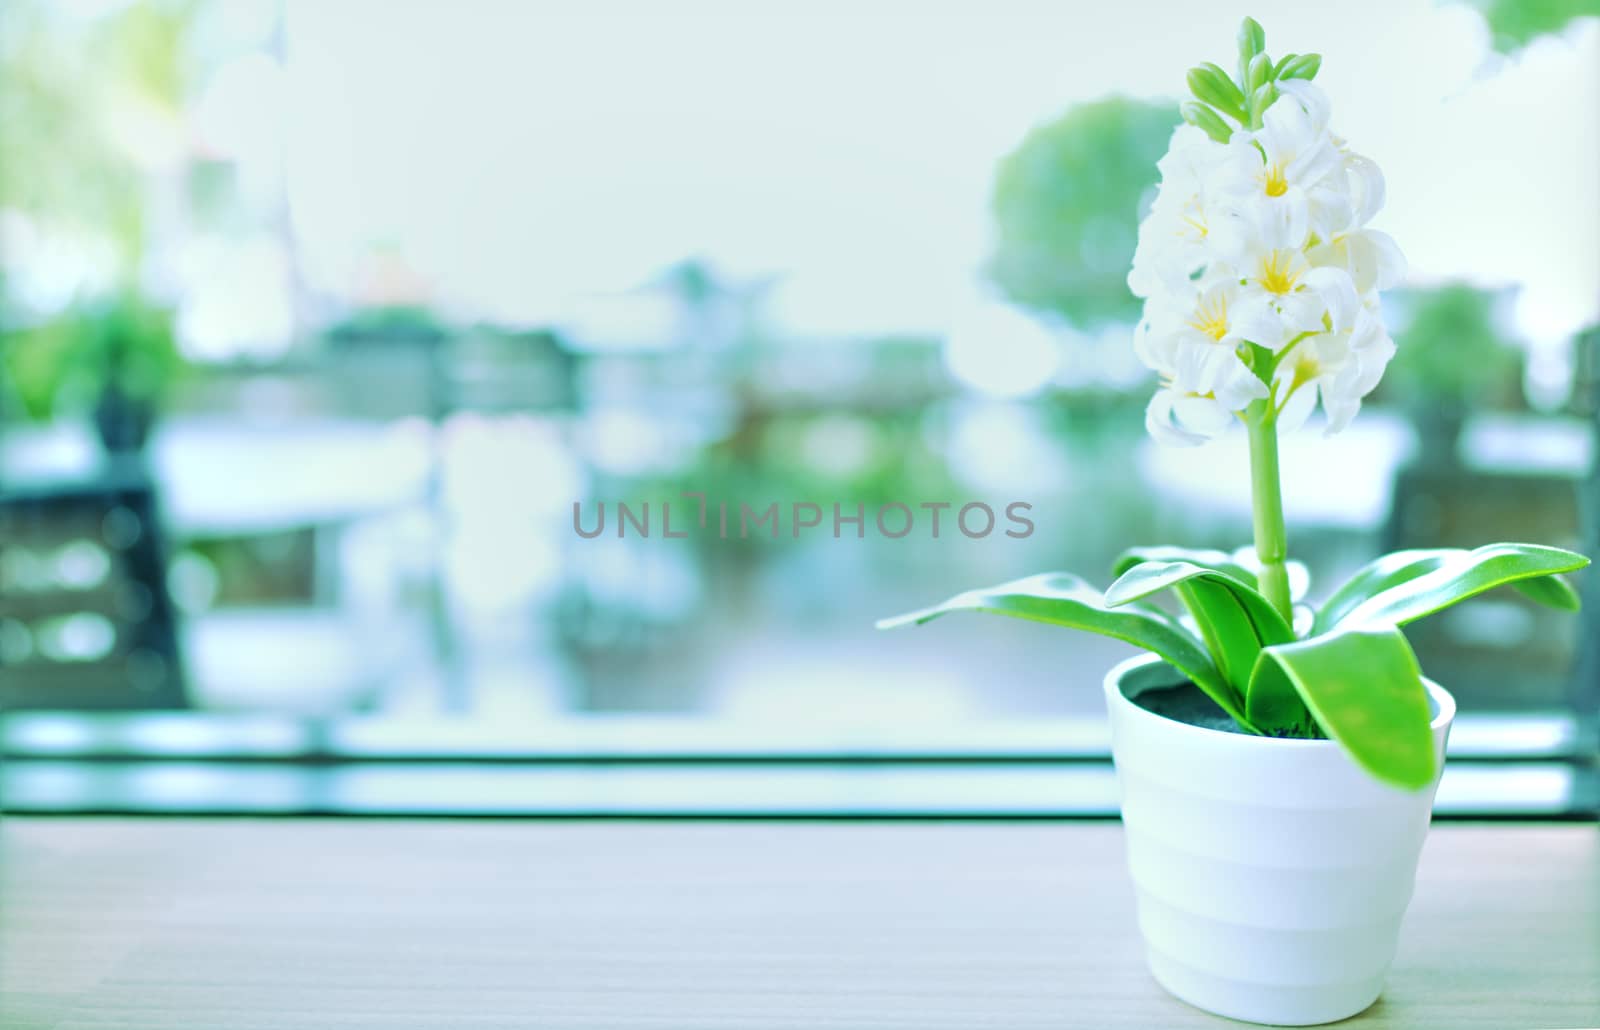 Vintage style image, ornamental plant on white glass pot with copy space.